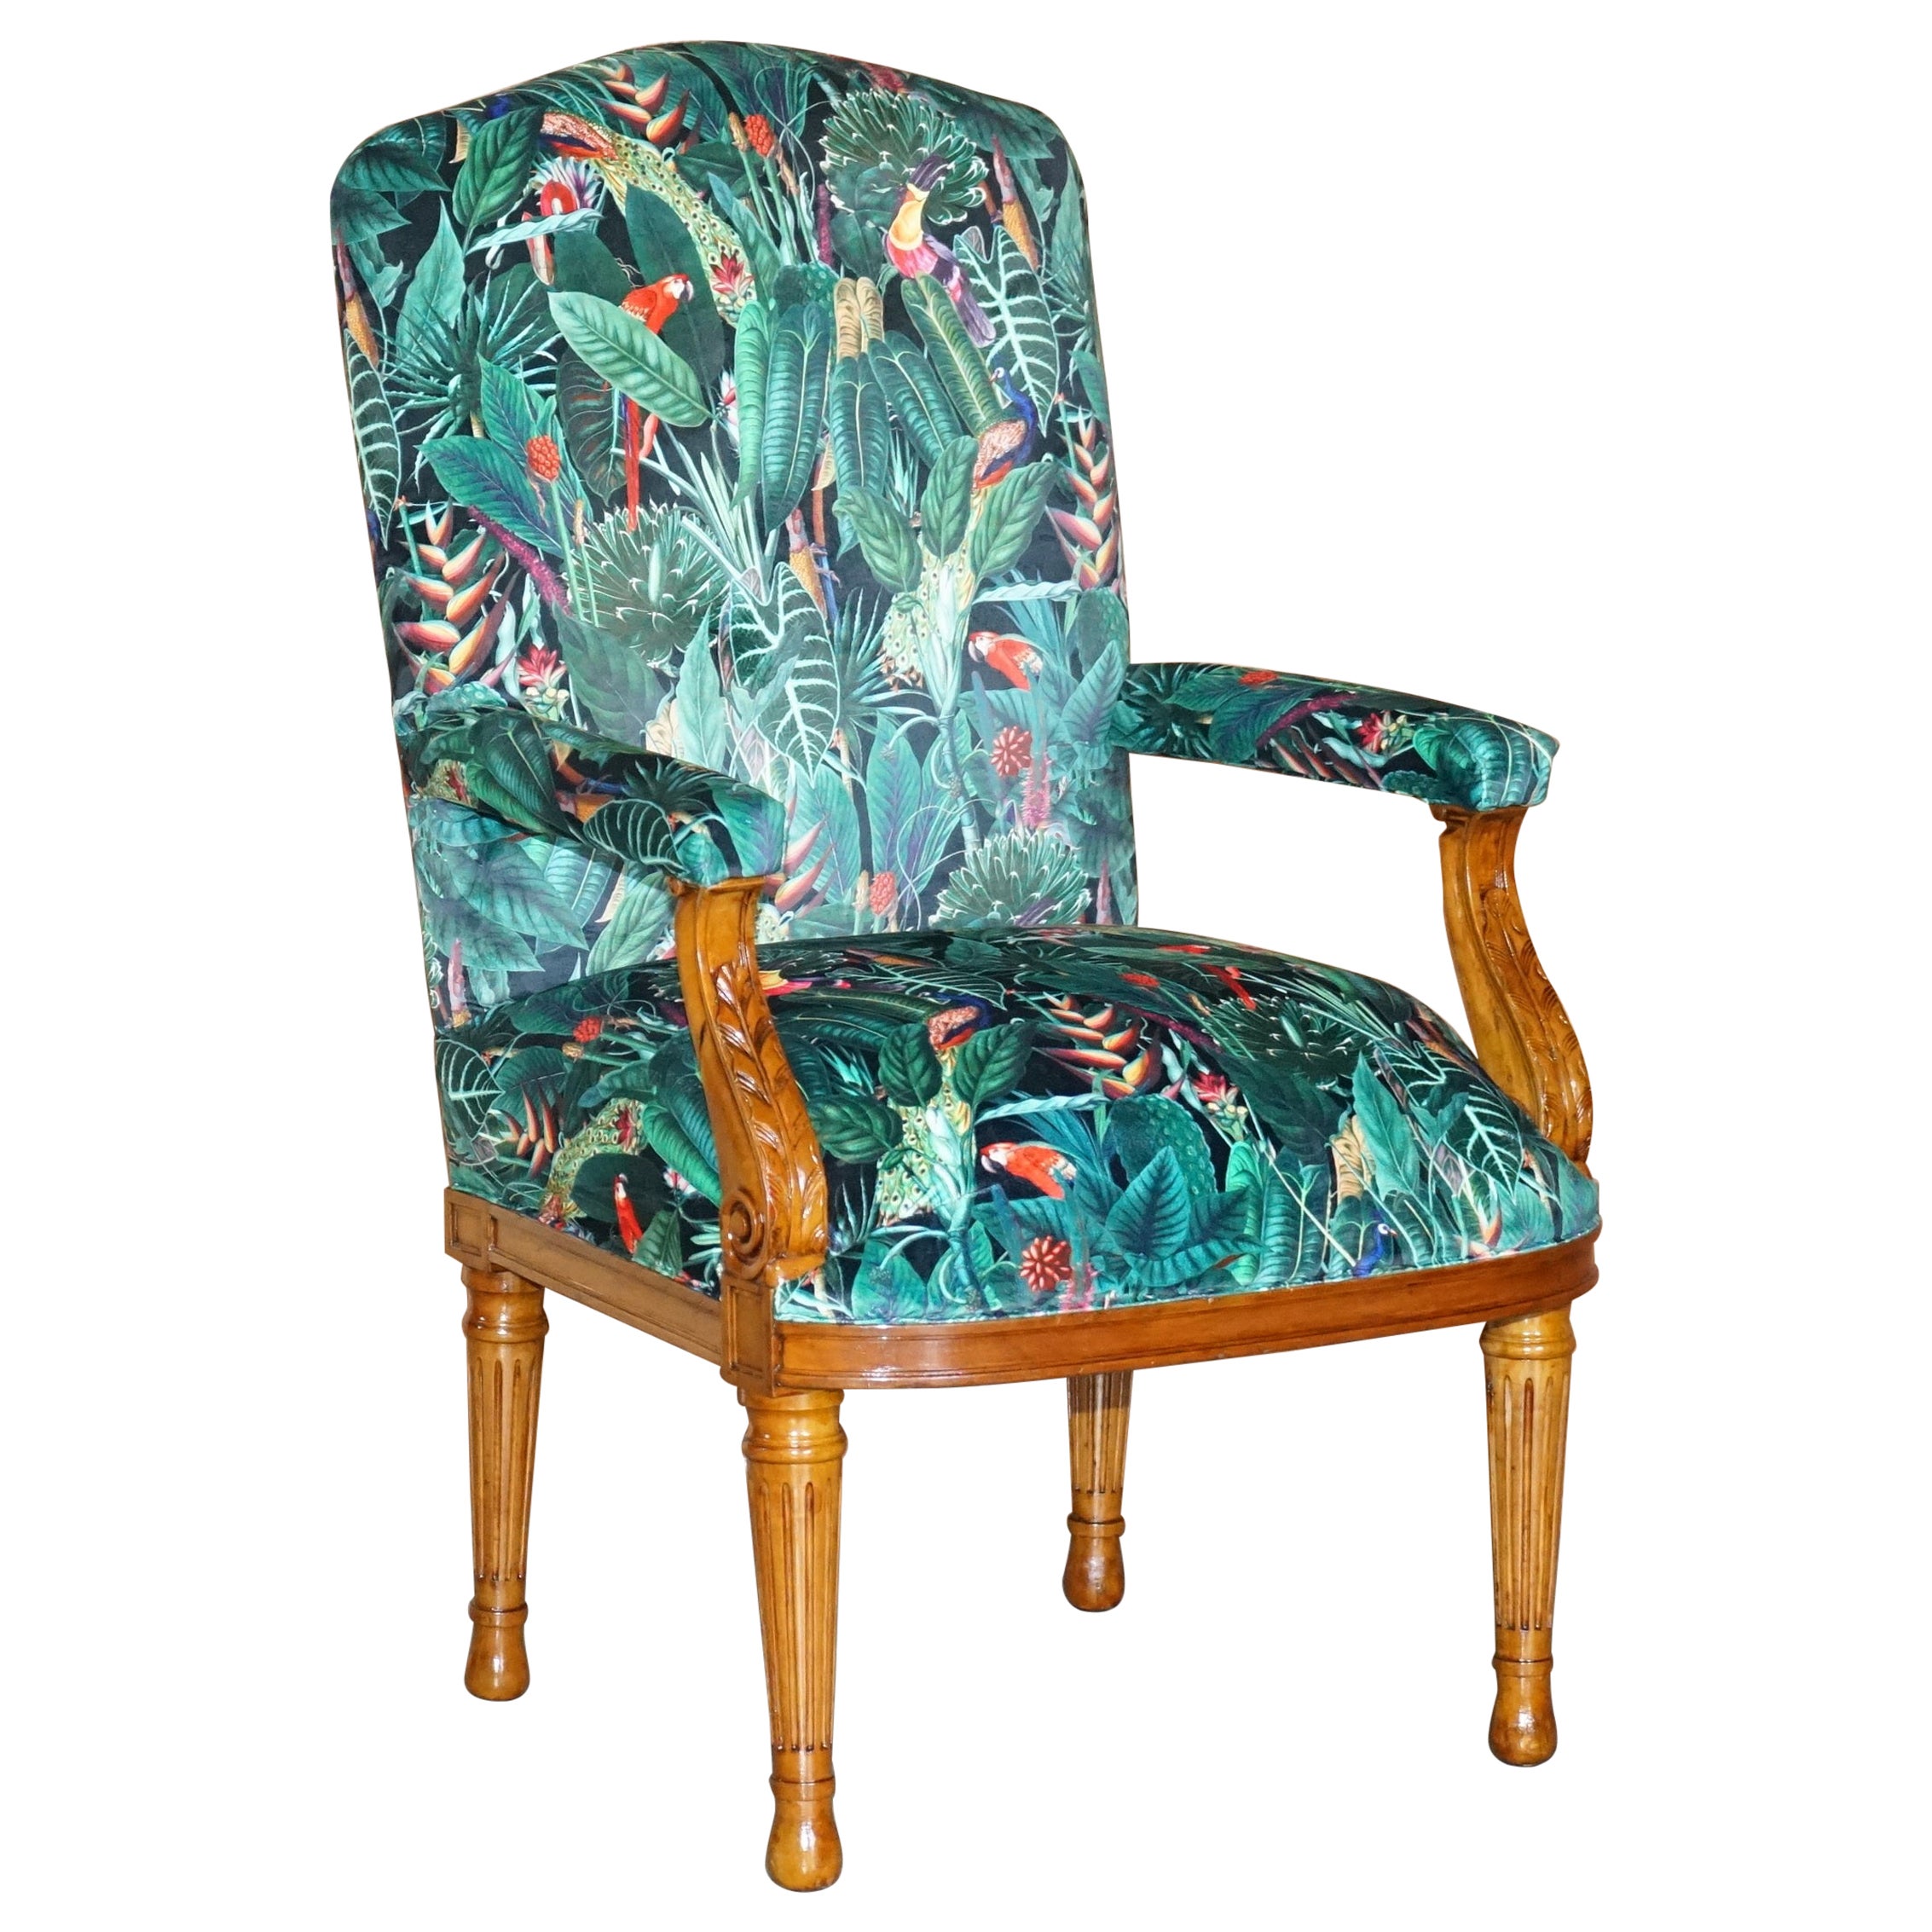 Lovely Vintage English Carver Walnut Armchair with Birds of Paradise Upholstery For Sale